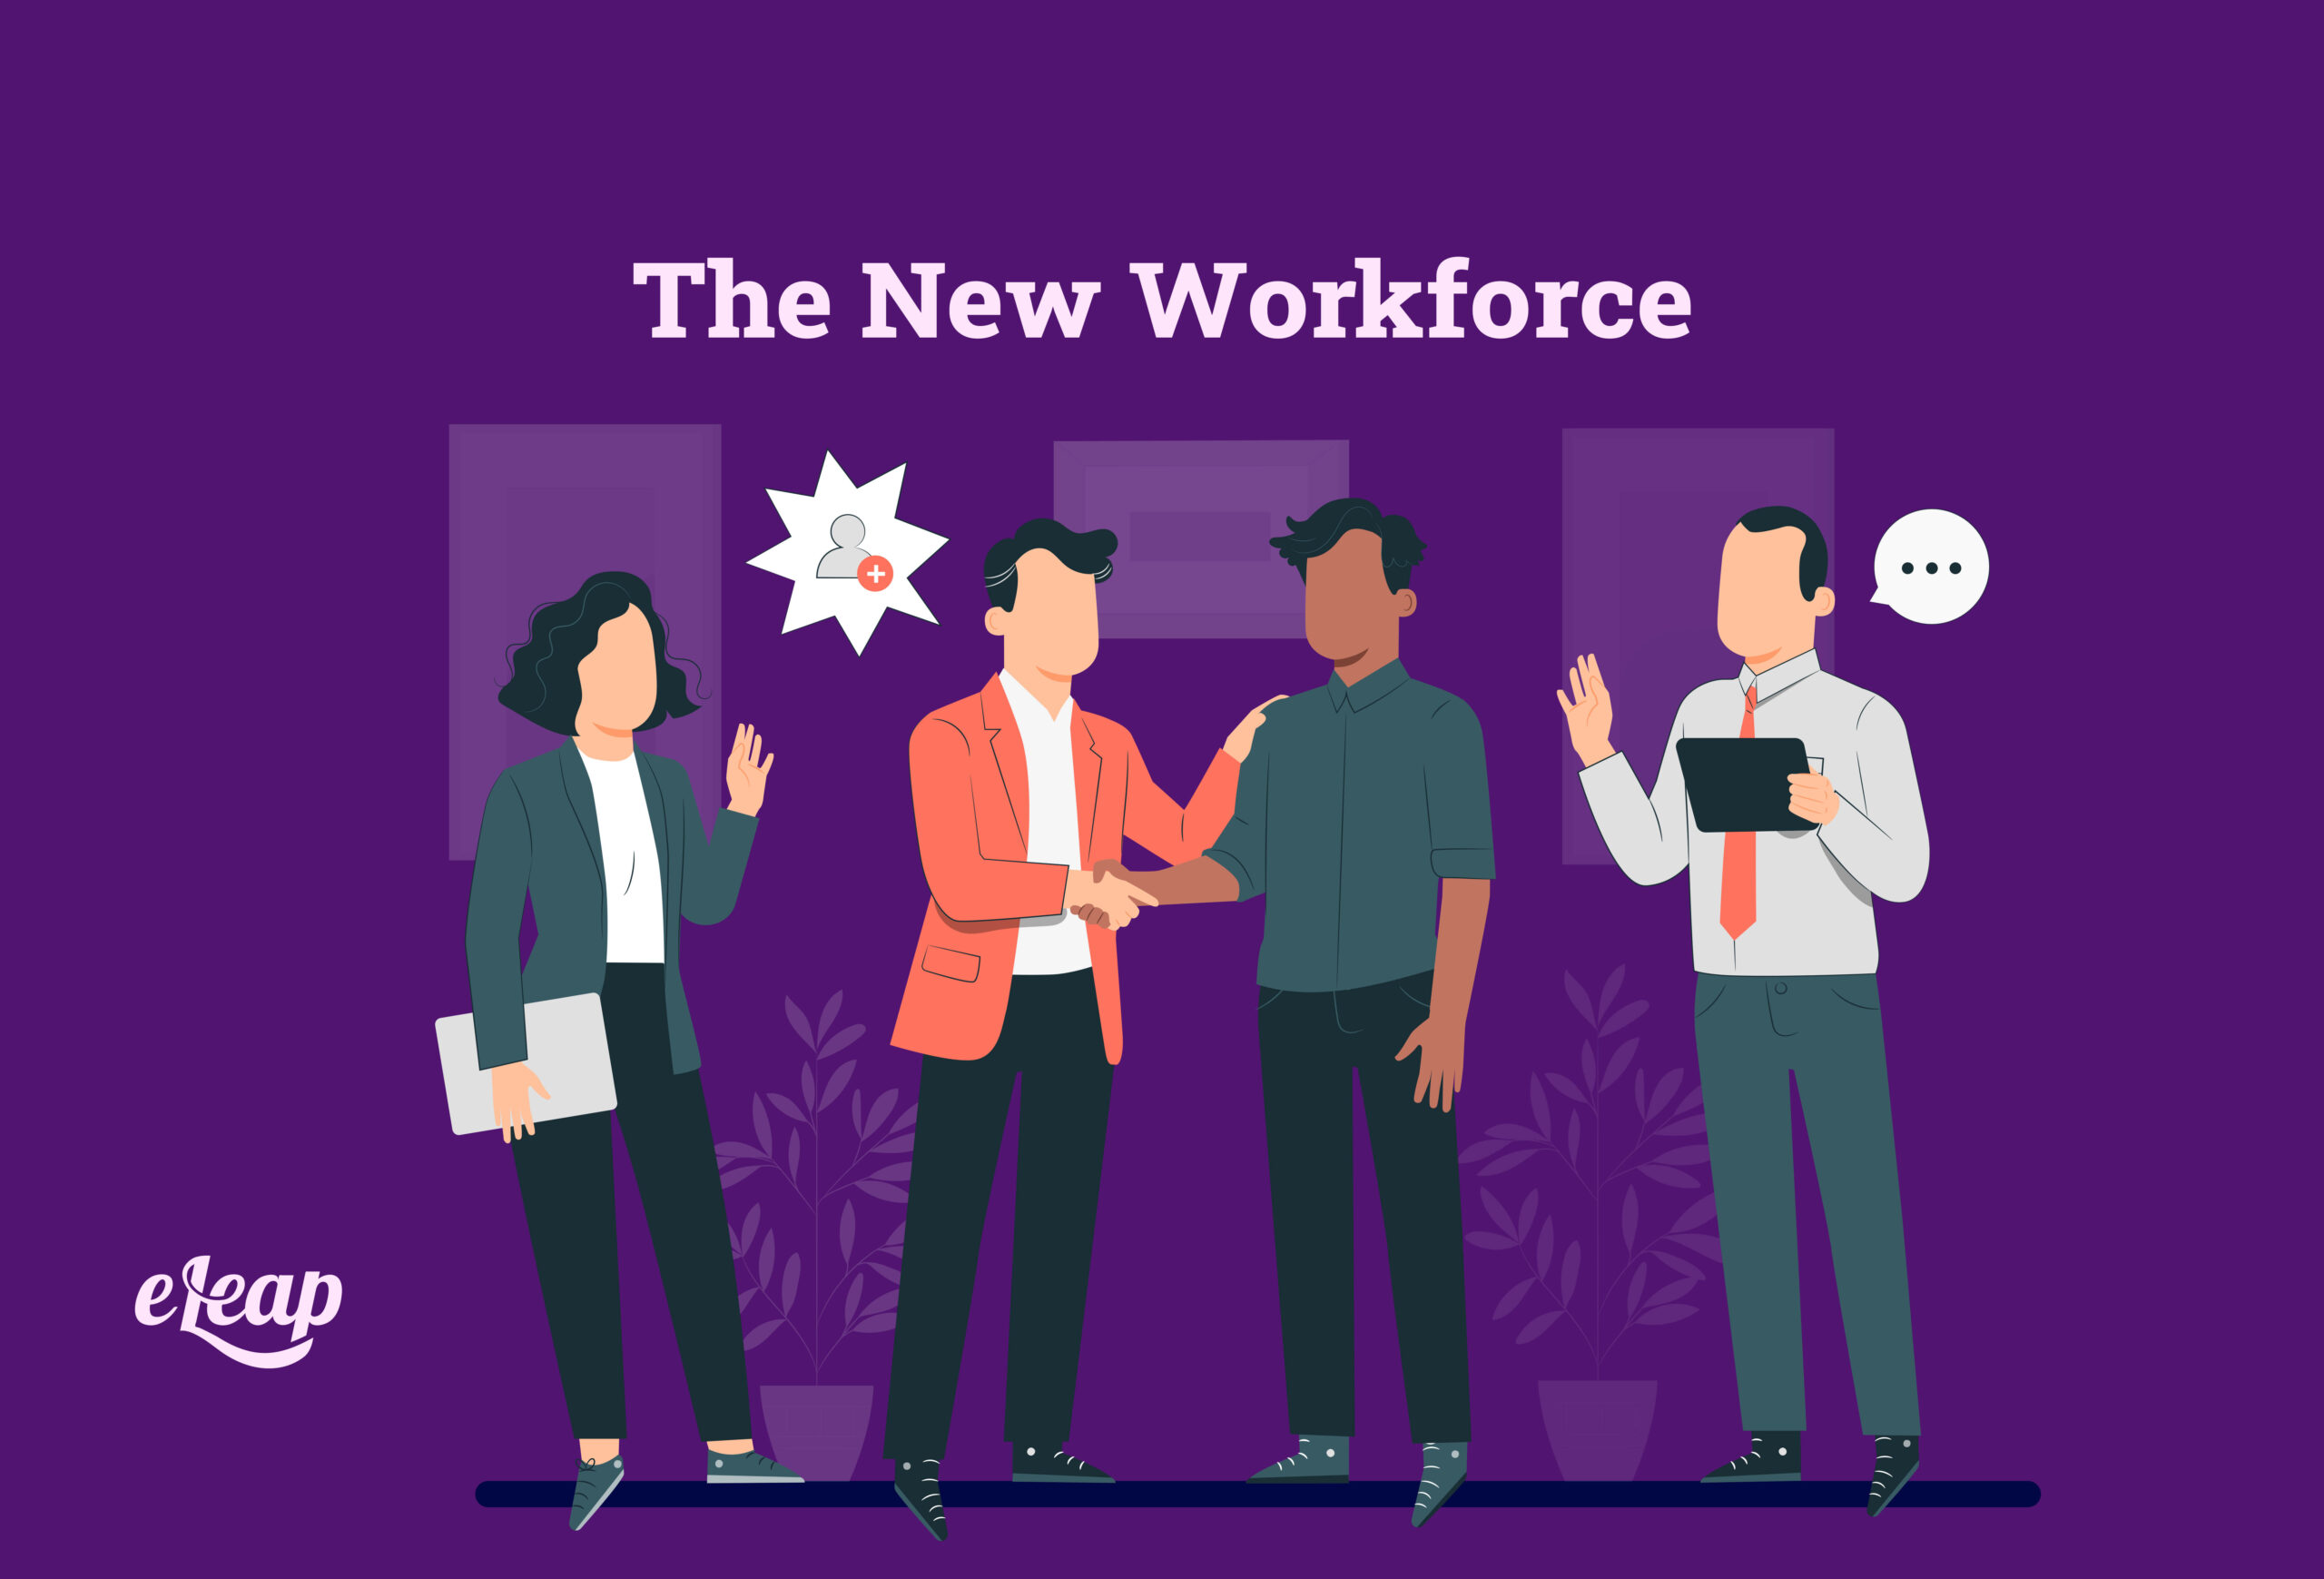 The New Workforce